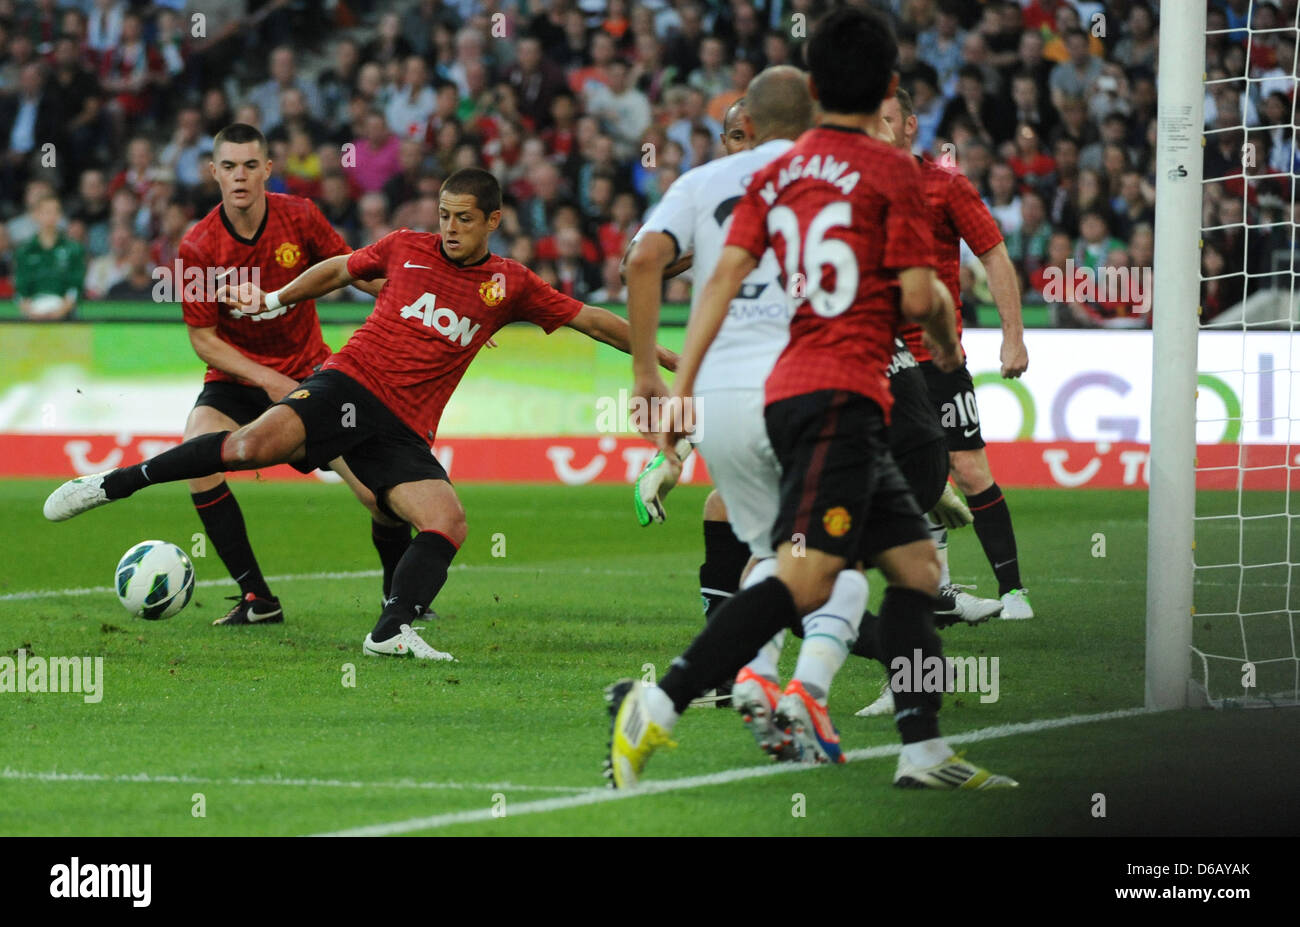 Manchester's Javier Hernandez (Chicharito, 2-l) kicks the ball during the friendly soccer match between Hanover 96 and Manchester United at the AWD Arena stadium in Hanover, Germany, 11 August 2012. Photo: Julian Stratenschulte dpa/lni  +++(c) dpa - Bildfunk+++ Stock Photo